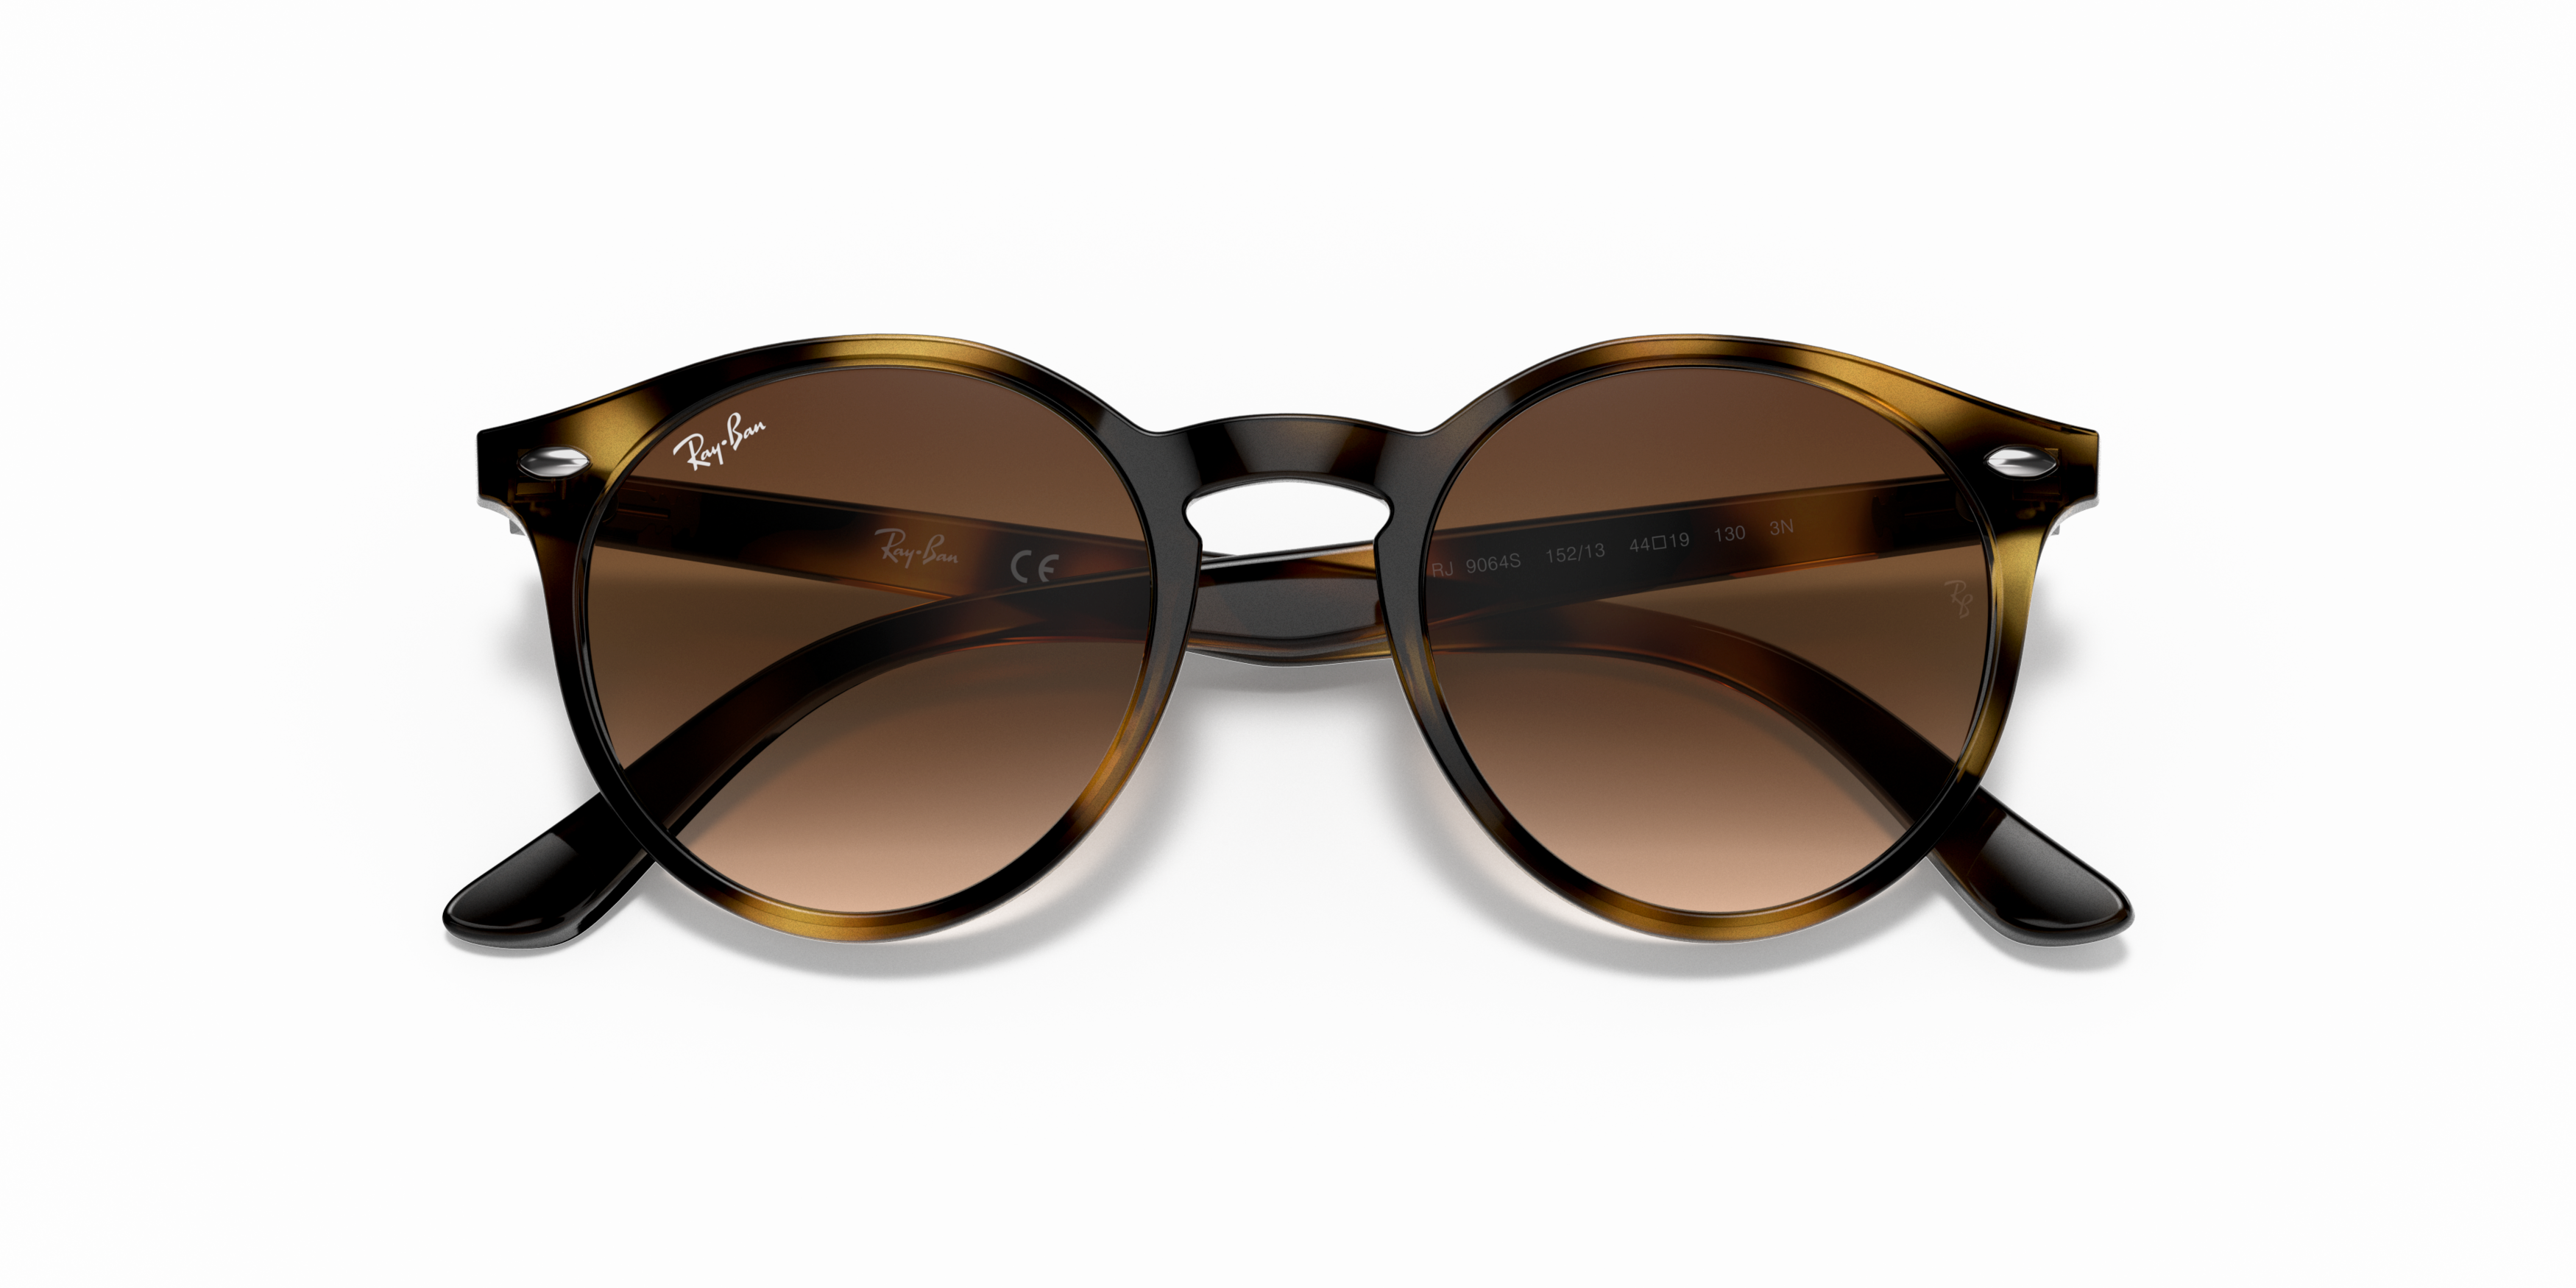 [products.image.folded] RAY-BAN RJ9064S 152/13